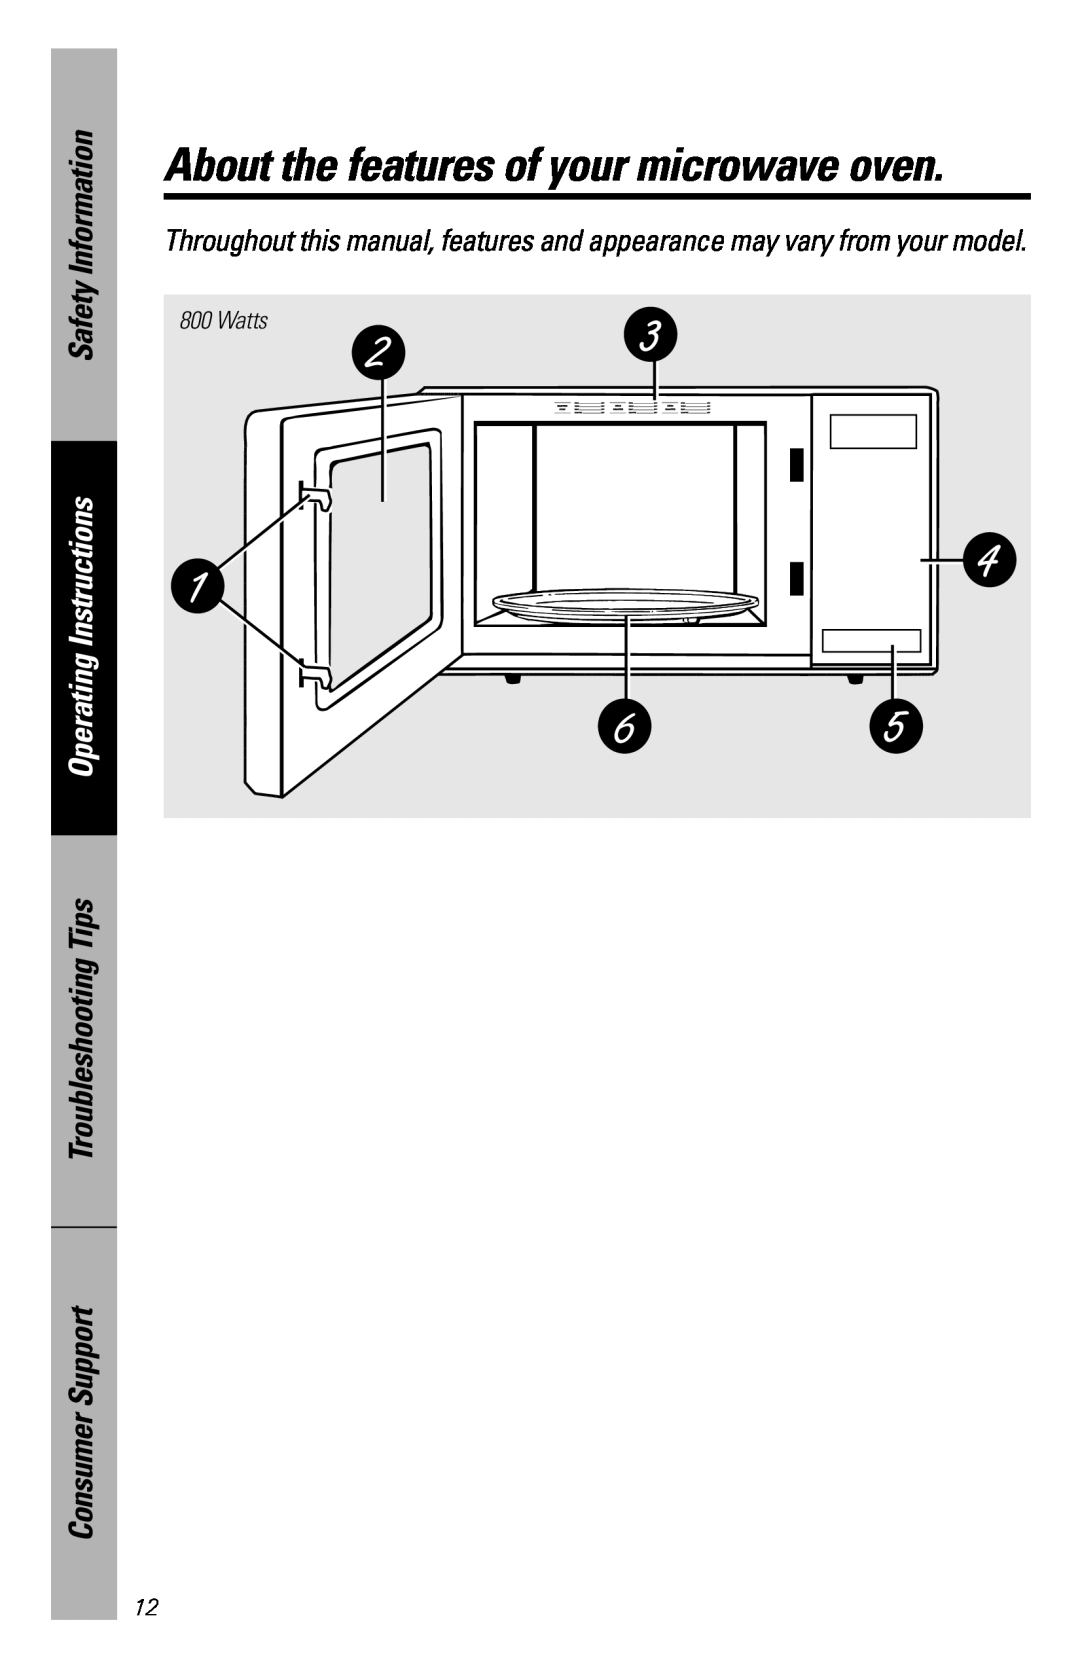 GE JES831 owner manual About the features of your microwave oven, Safety Information, Operating Instructions 